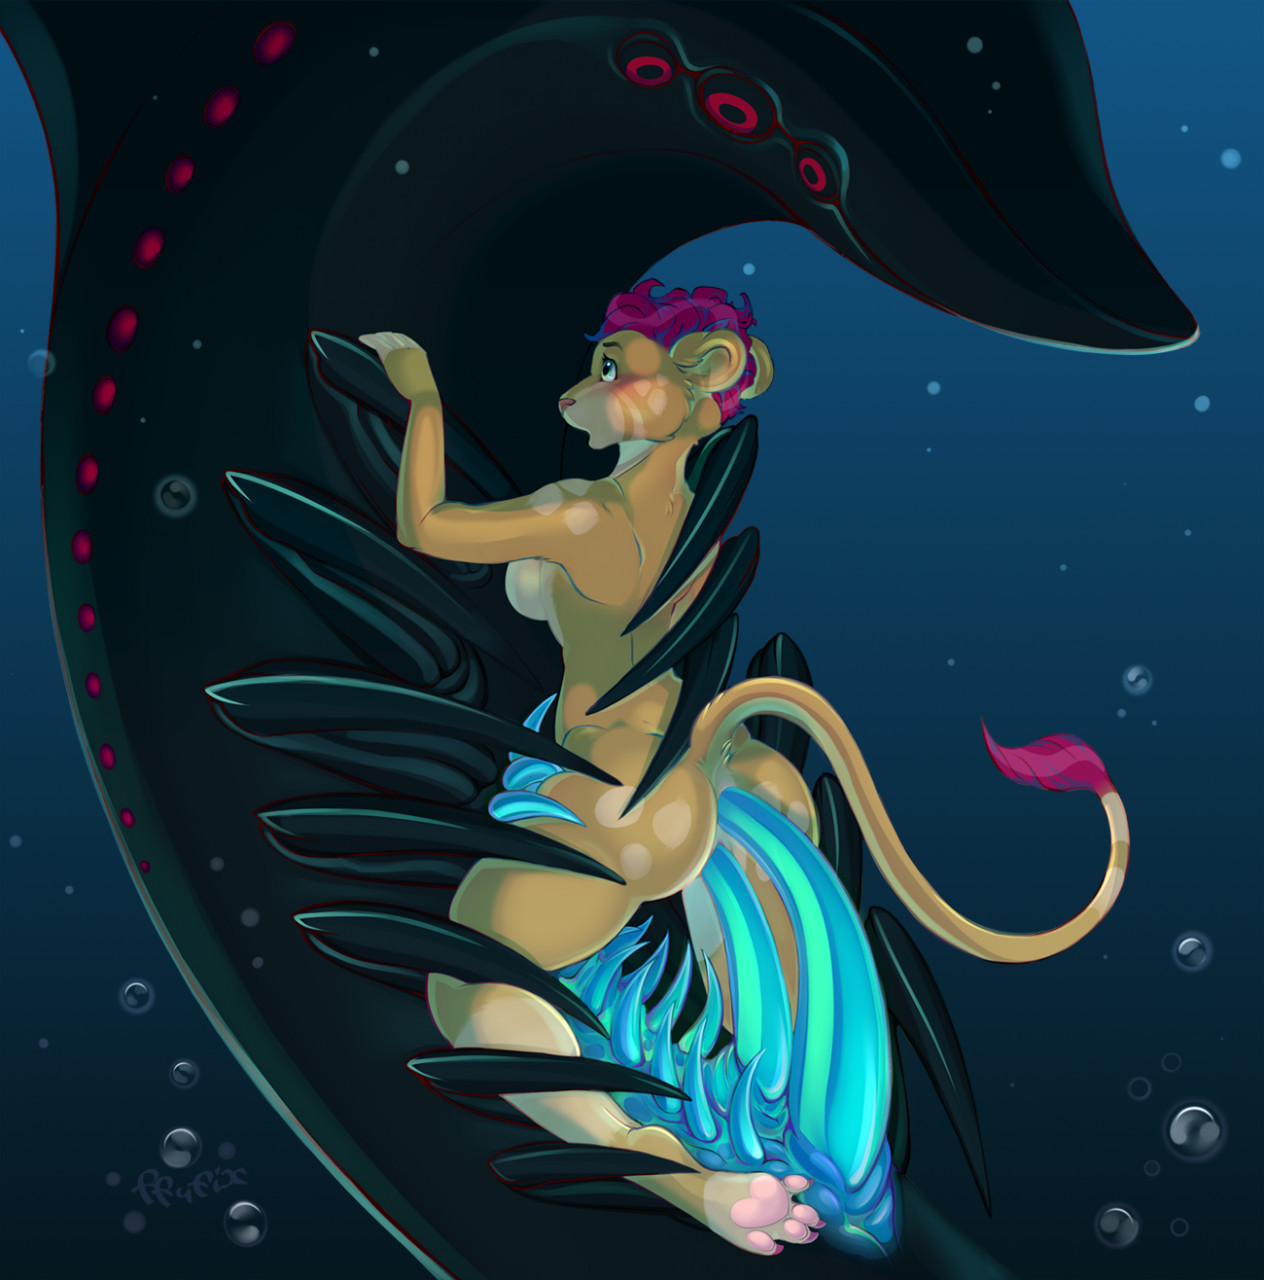 Get wet with the hottest rule 34 subnautica gallery on the web!